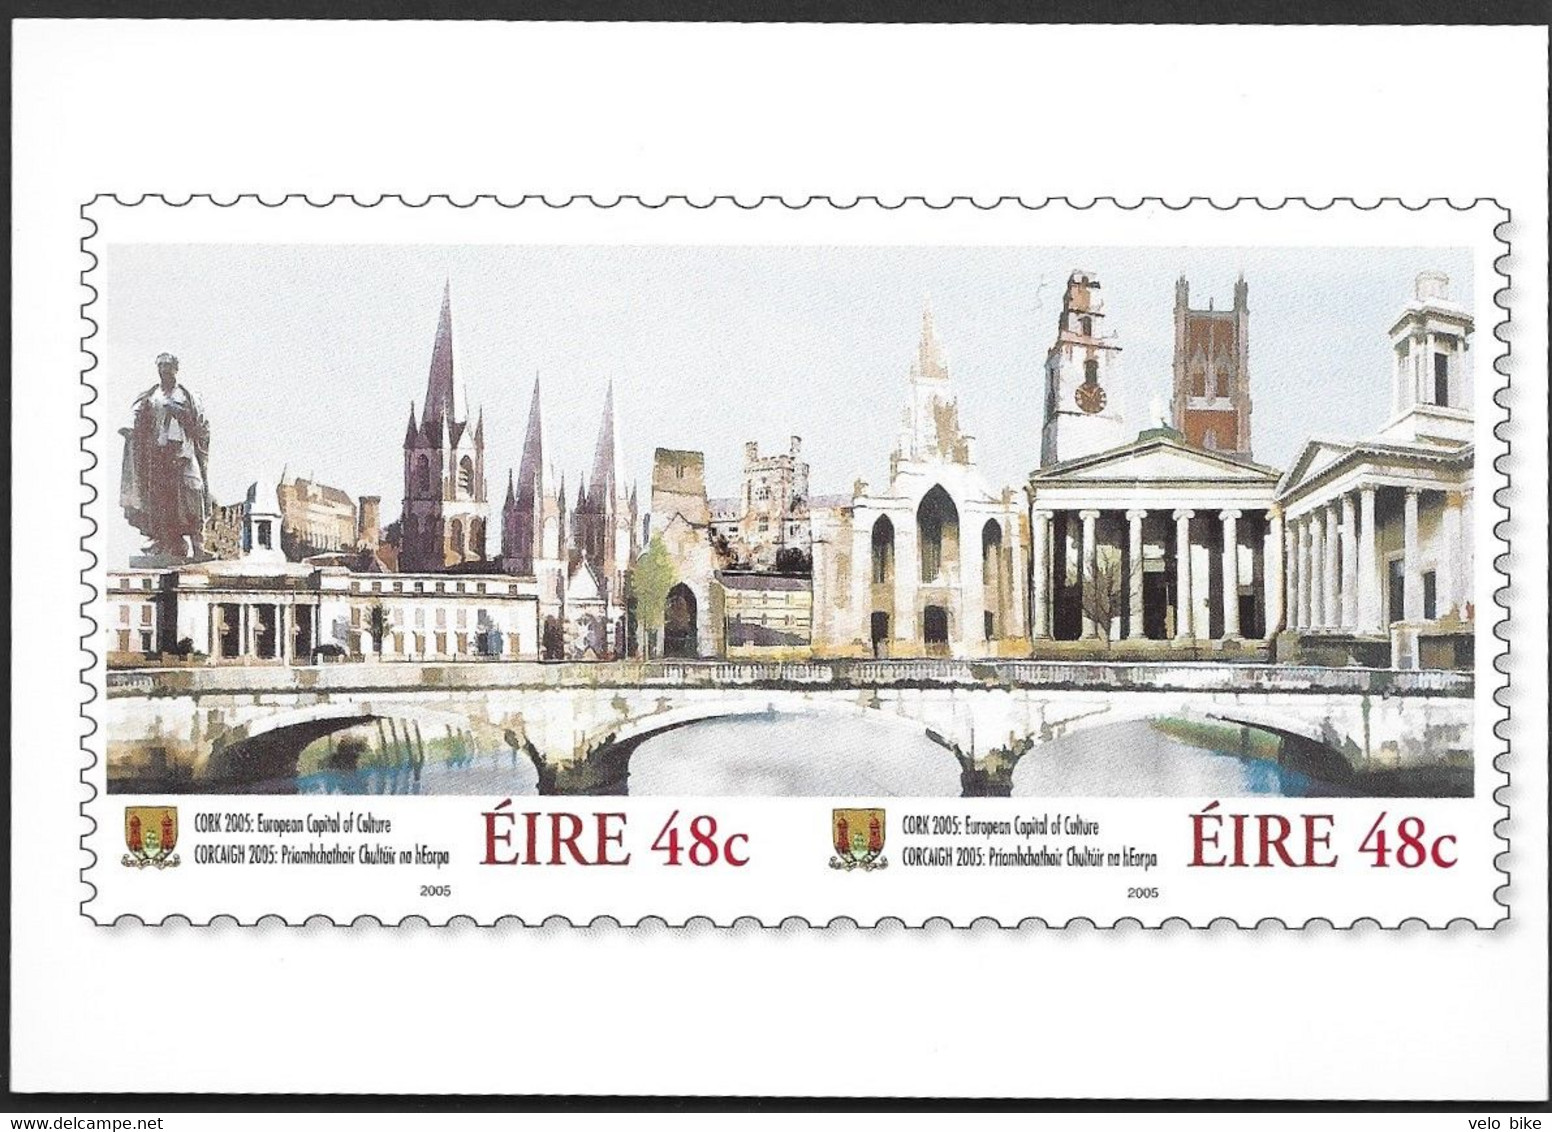 Eire Ireland Postal Stationery Postage Paid Cork 2005 Art Statue Bridge Church Capitol Of Culture Prioritaire Airmail - Postal Stationery